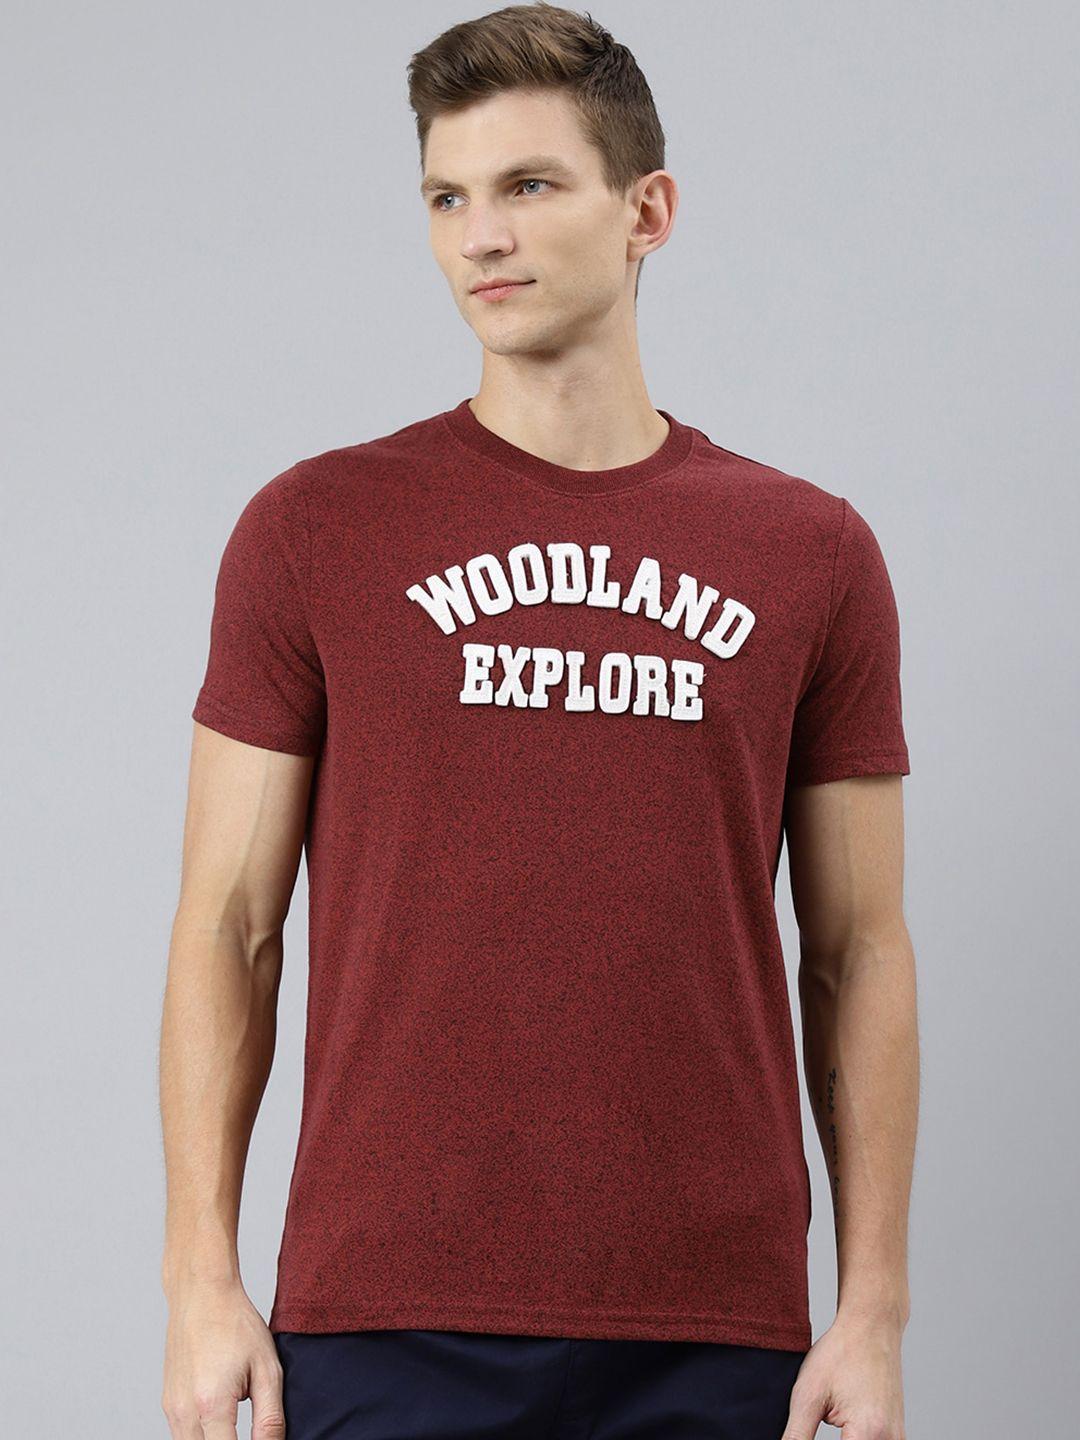 woodland-men-red-typography-printed-applique-t-shirt